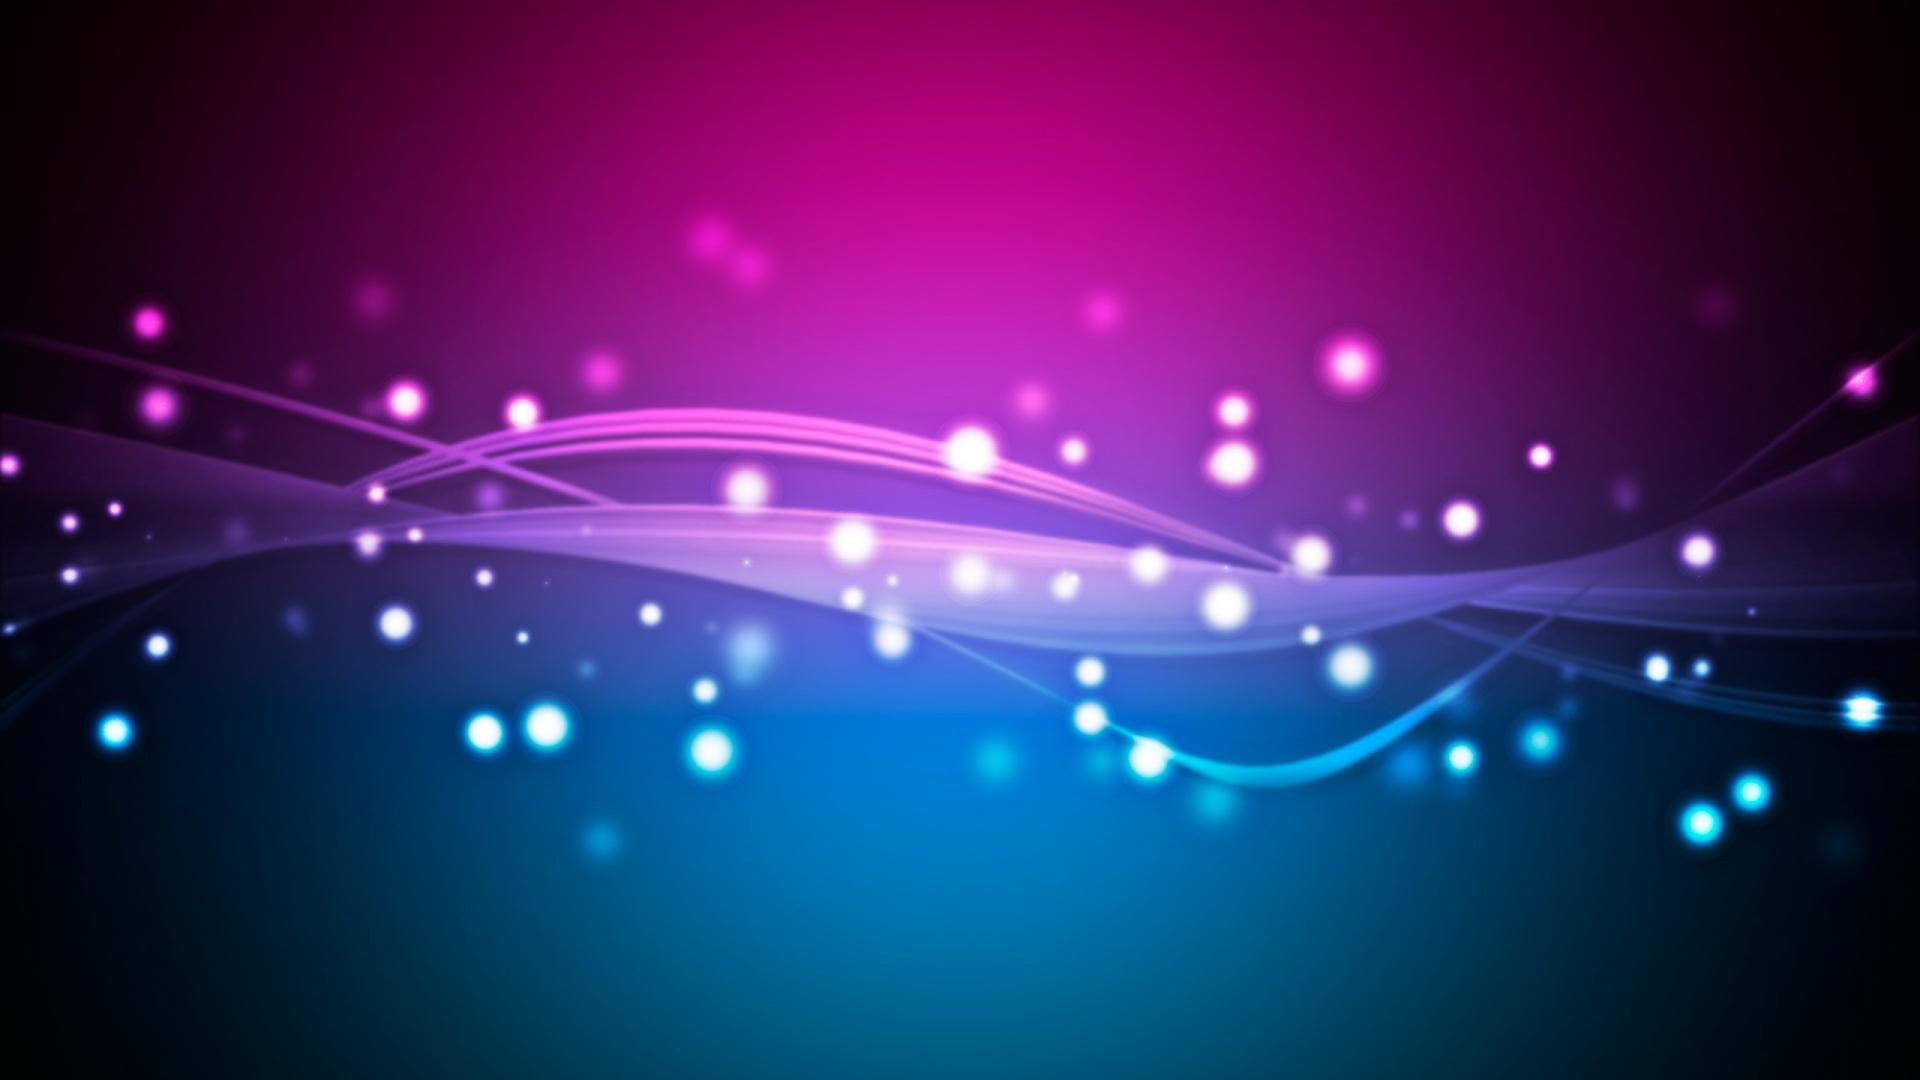 Blue And Purple Abstract Wallpaper Download